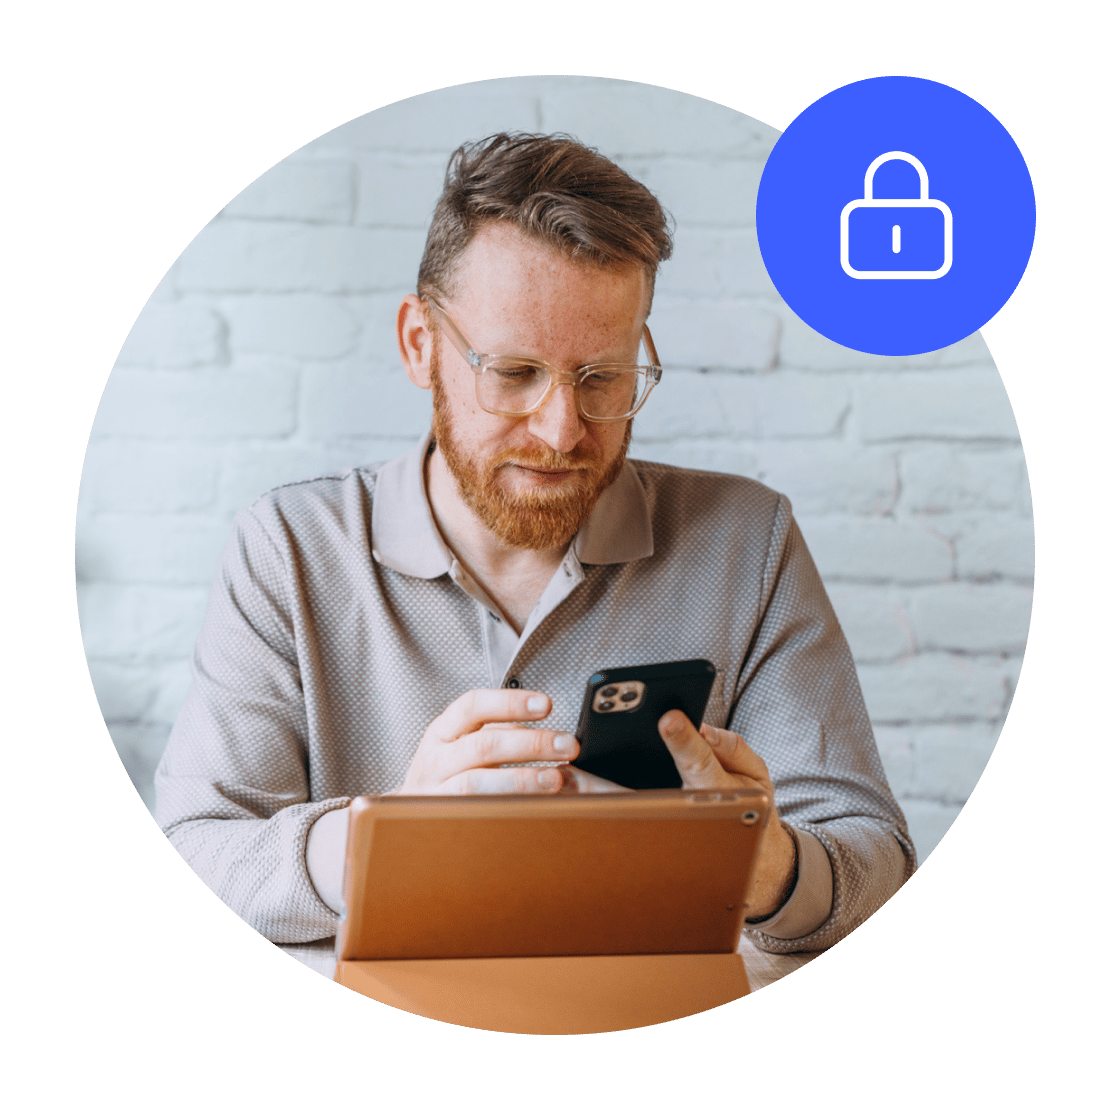 A man installed NordVPN on his devices for secure browsing.